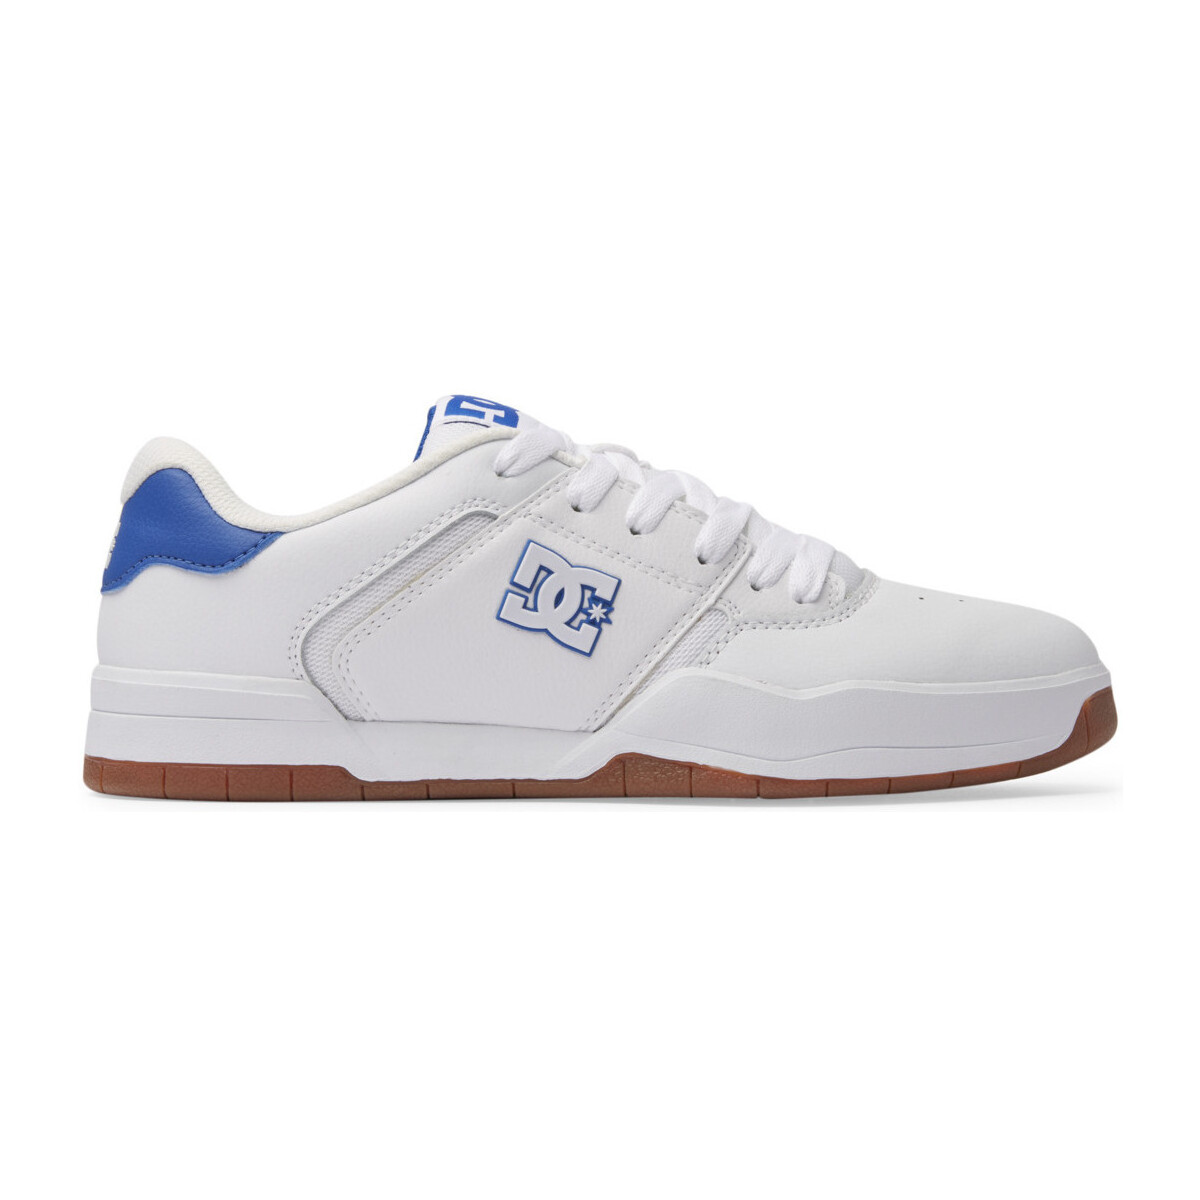 Chaussures Homme Chaussures de Skate DC Shoes Central Blanc